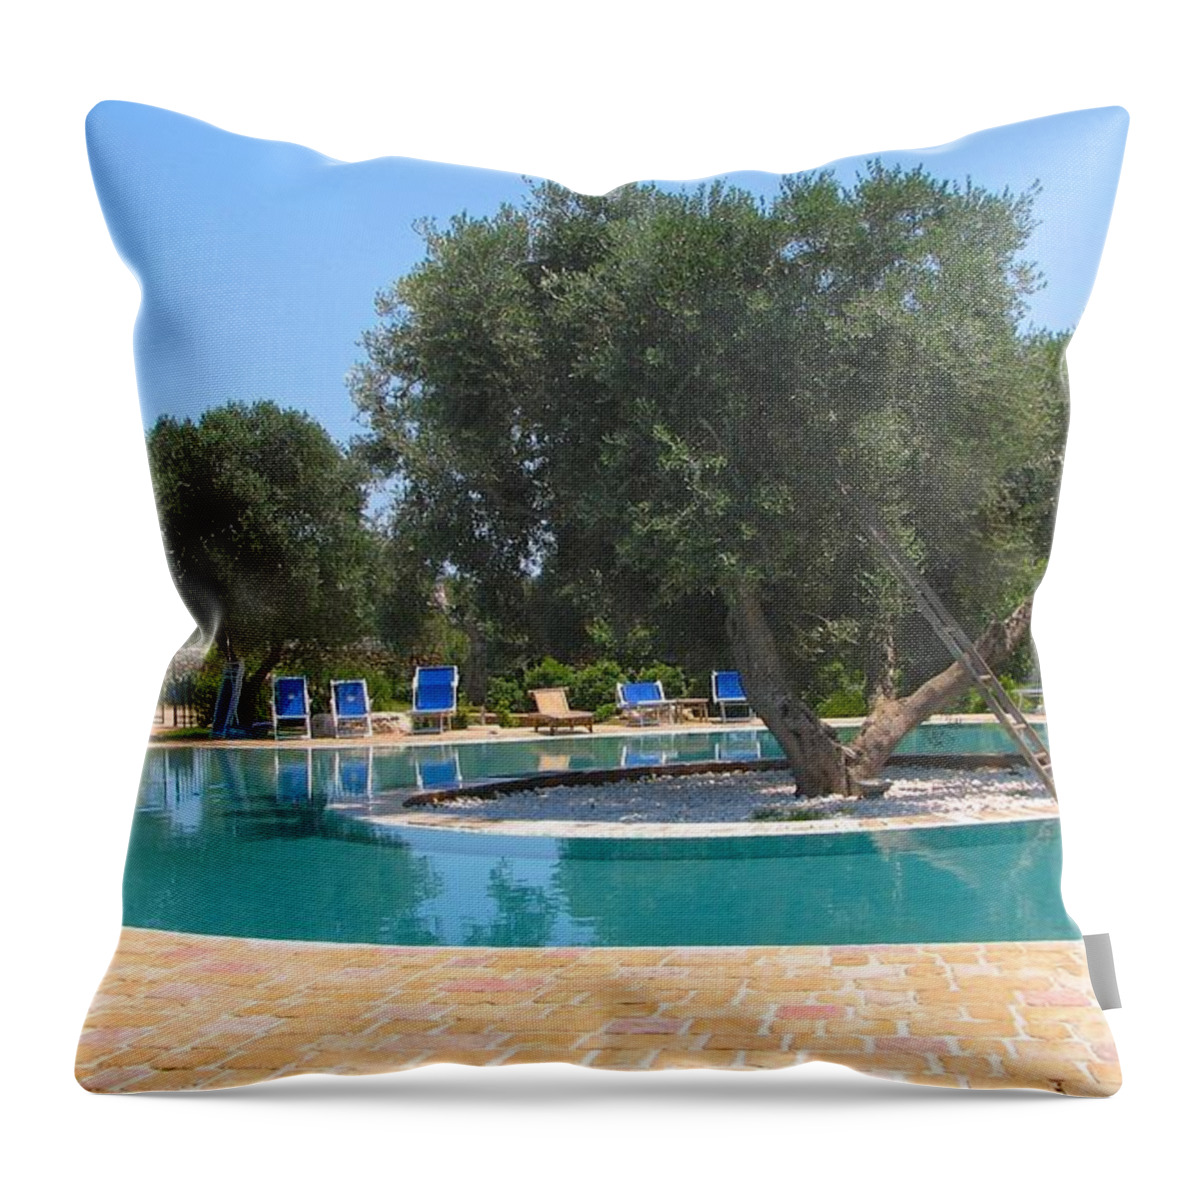 Cityscape Throw Pillow featuring the photograph Italy Resort- Olive Tree in Pool by Italian Art